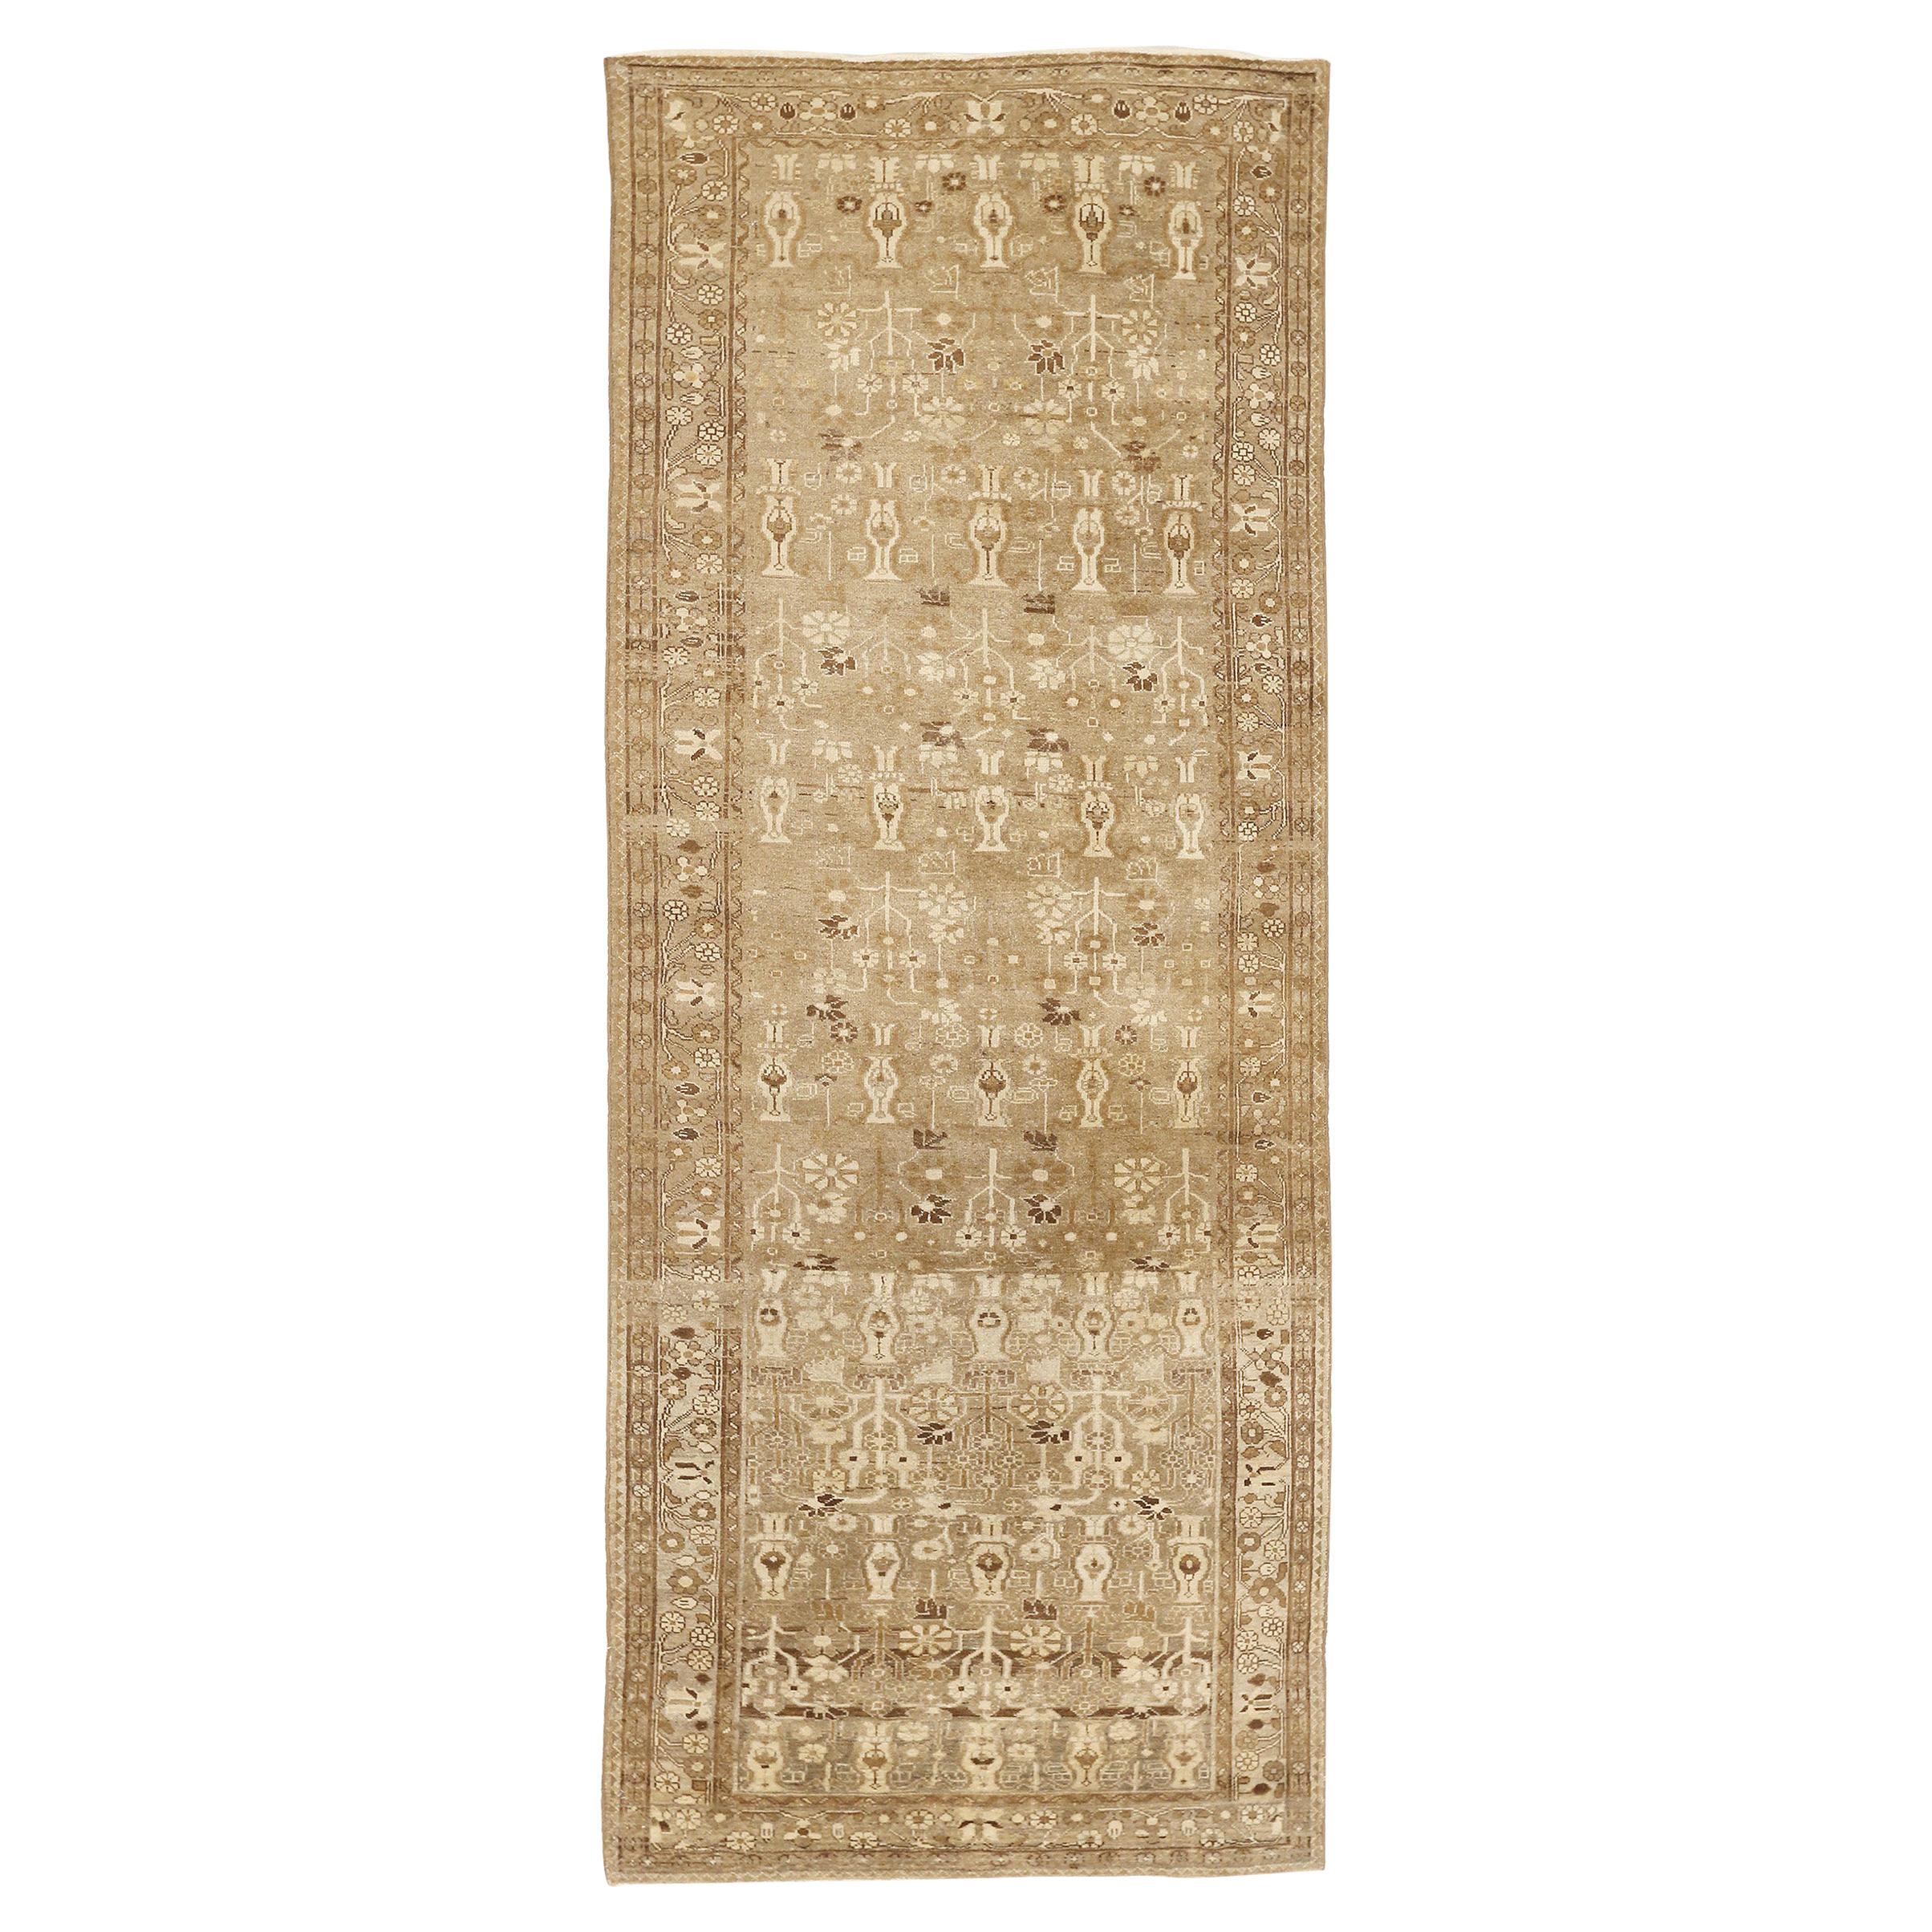 Antique Persian Malayer Rug with Ivory and Brown Flower Details